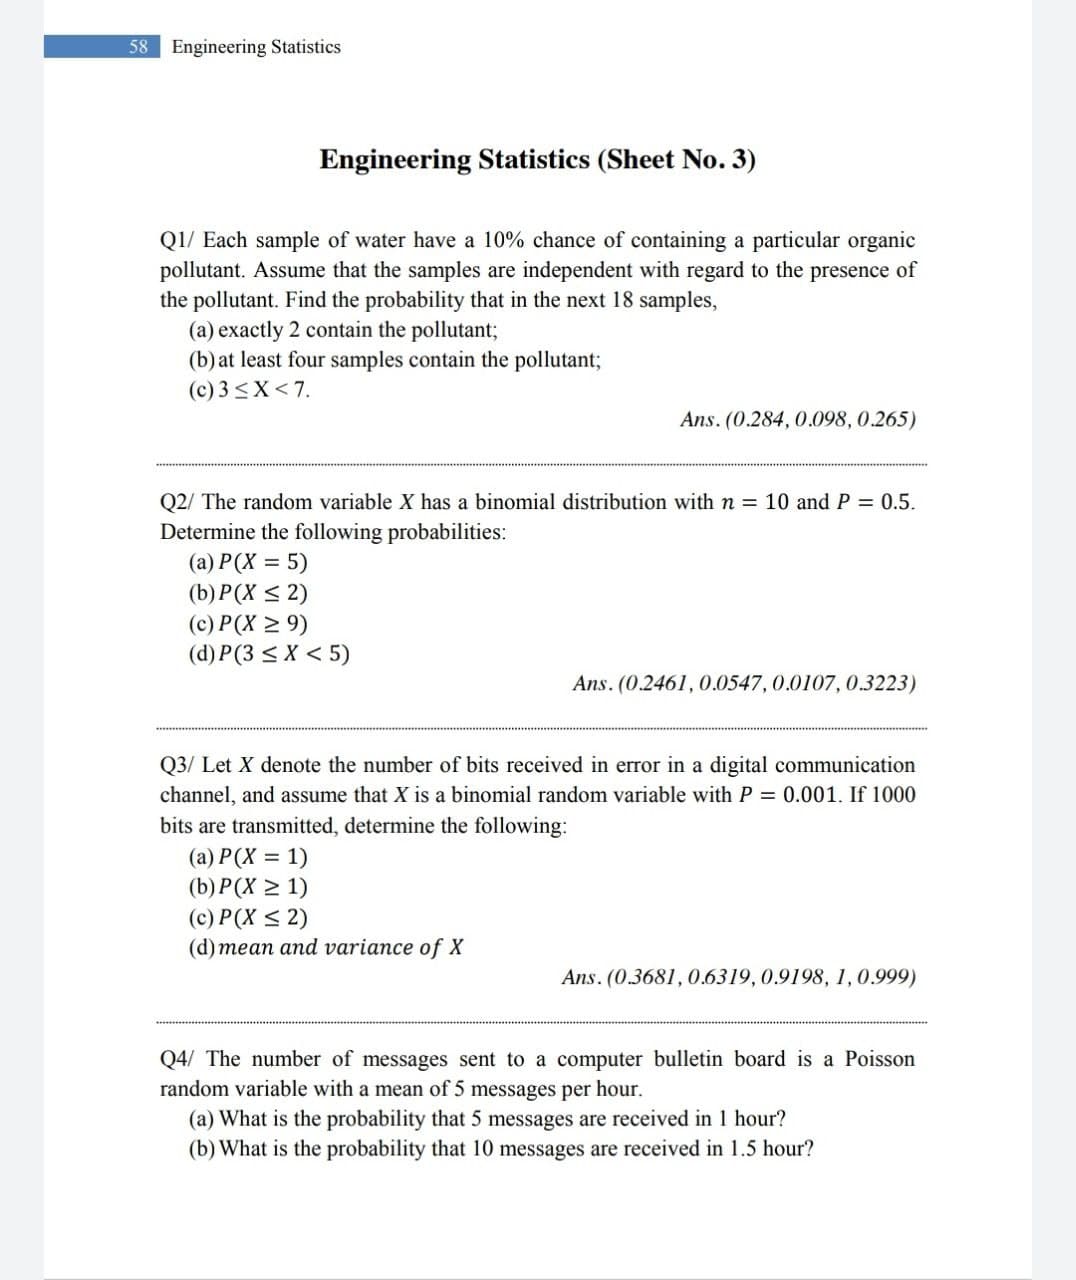 58
Engineering Statistics
Engineering Statistics (Sheet No. 3)
Q1/ Each sample of water have a 10% chance of containing a particular organic
pollutant. Assume that the samples are independent with regard to the presence of
the pollutant. Find the probability that in the next 18 samples,
(a) exactly 2 contain the pollutant;
(b) at least four samples contain the pollutant;
(c) 3 <X< 7.
Ans. (0.284, 0.098, 0.265)
Q2/ The random variable X has a binomial distribution with n = 10 and P = 0.5.
Determine the following probabilities:
(a) P(X = 5)
(b) P(X < 2)
(c) P(X > 9)
(d) P(3 < X < 5)
Ans. (0.2461, 0.0547, 0.0107, 0.3223)
Q3/ Let X denote the number of bits received in error in a digital communication
channel, and assume that X is a binomial random variable with P = 0.001. If 1000
bits are transmitted, determine the following:
(a) P(X = 1)
(b) P(X > 1)
(c) P(X < 2)
(d) mean and variance of X
Ans. (0.3681, 0.6319, 0.9198, 1,0.999)
Q4/ The number of messages sent to a computer bulletin board is a Poisson
random variable with a mean of 5 messages per hour.
(a) What is the probability that 5 messages are received in 1 hour?
(b) What is the probability that 10 messages are received in 1.5 hour?
